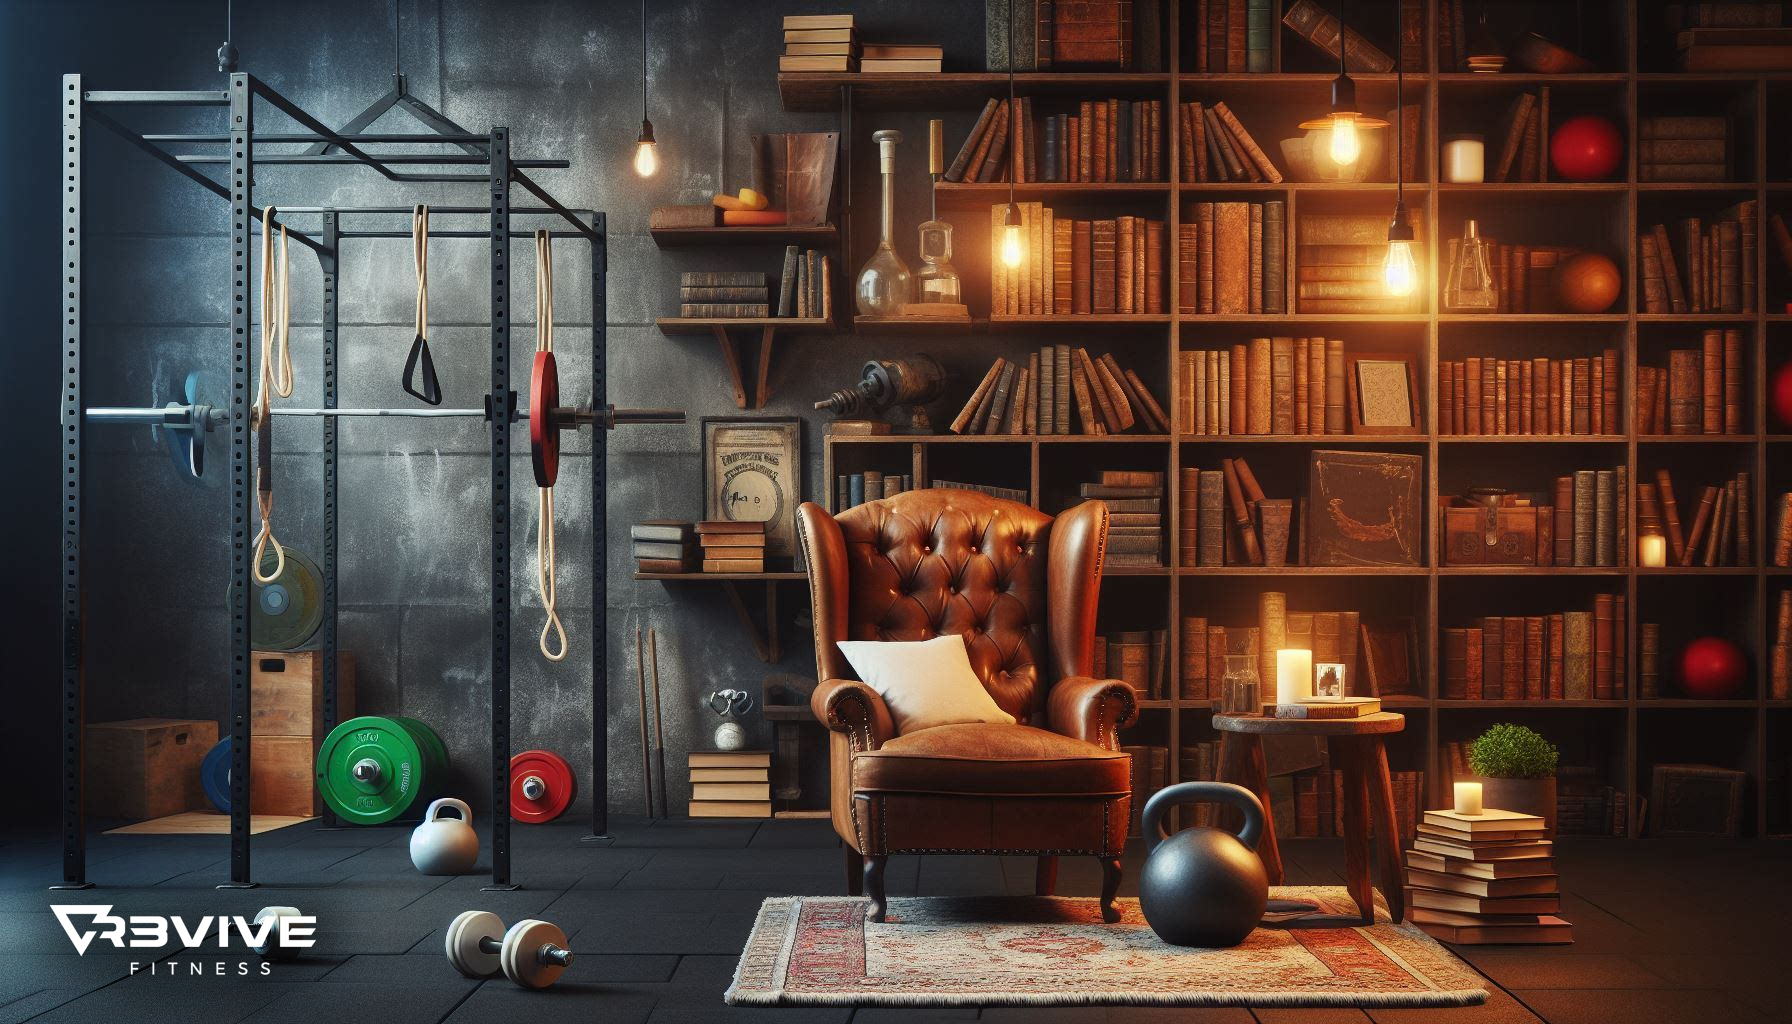 A generated image of a gym with a library for the R3VIVE Book Club